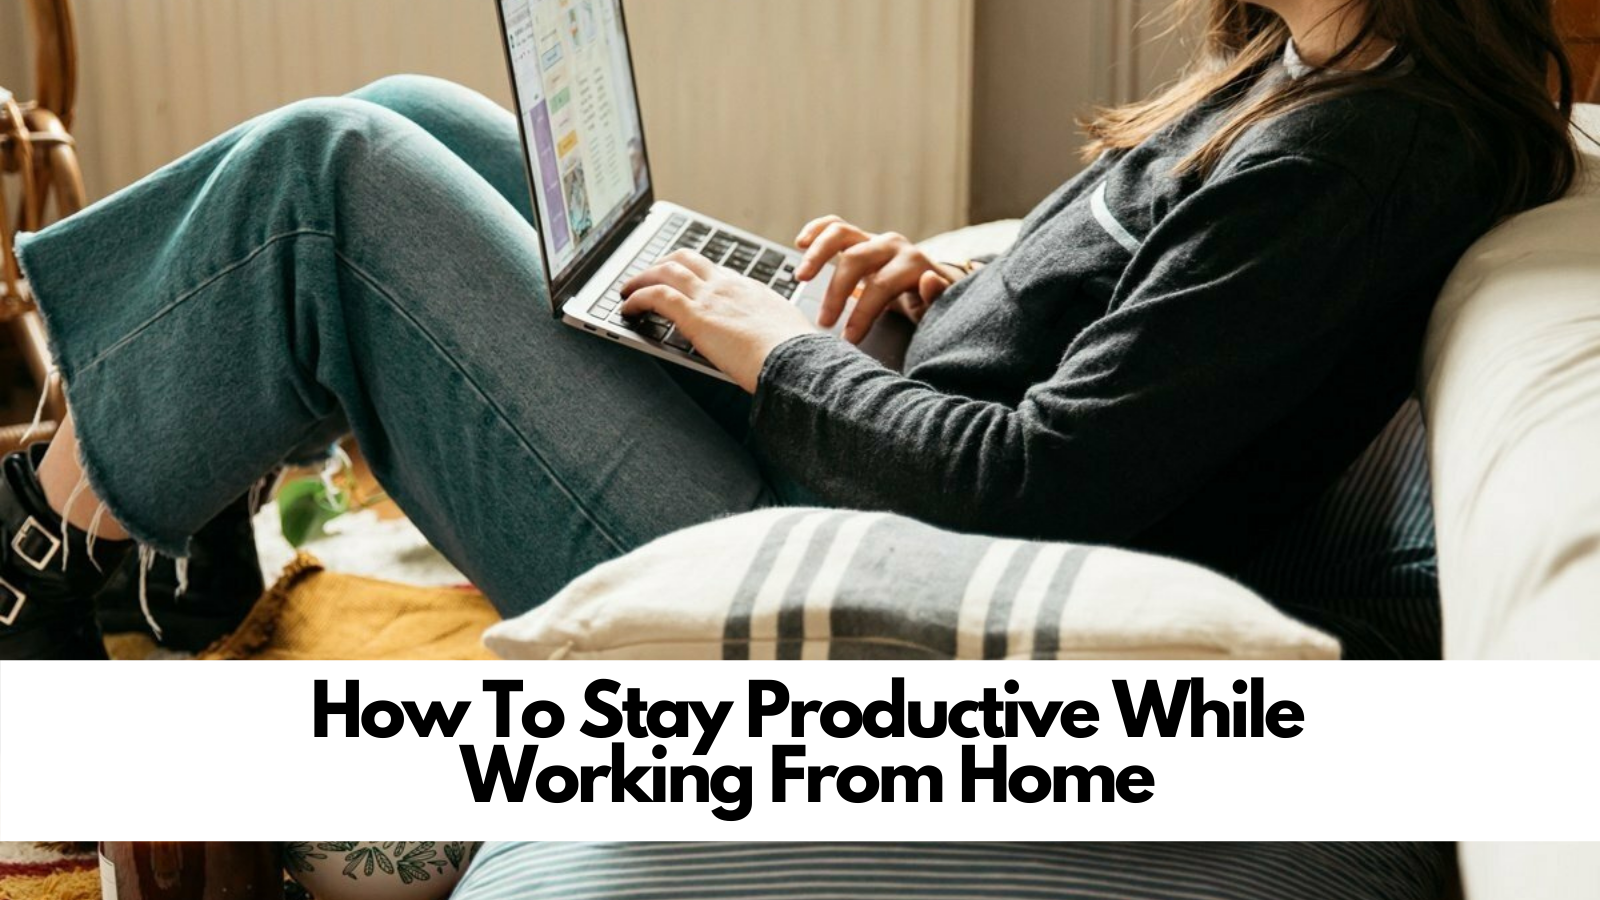 employees-working-from-home